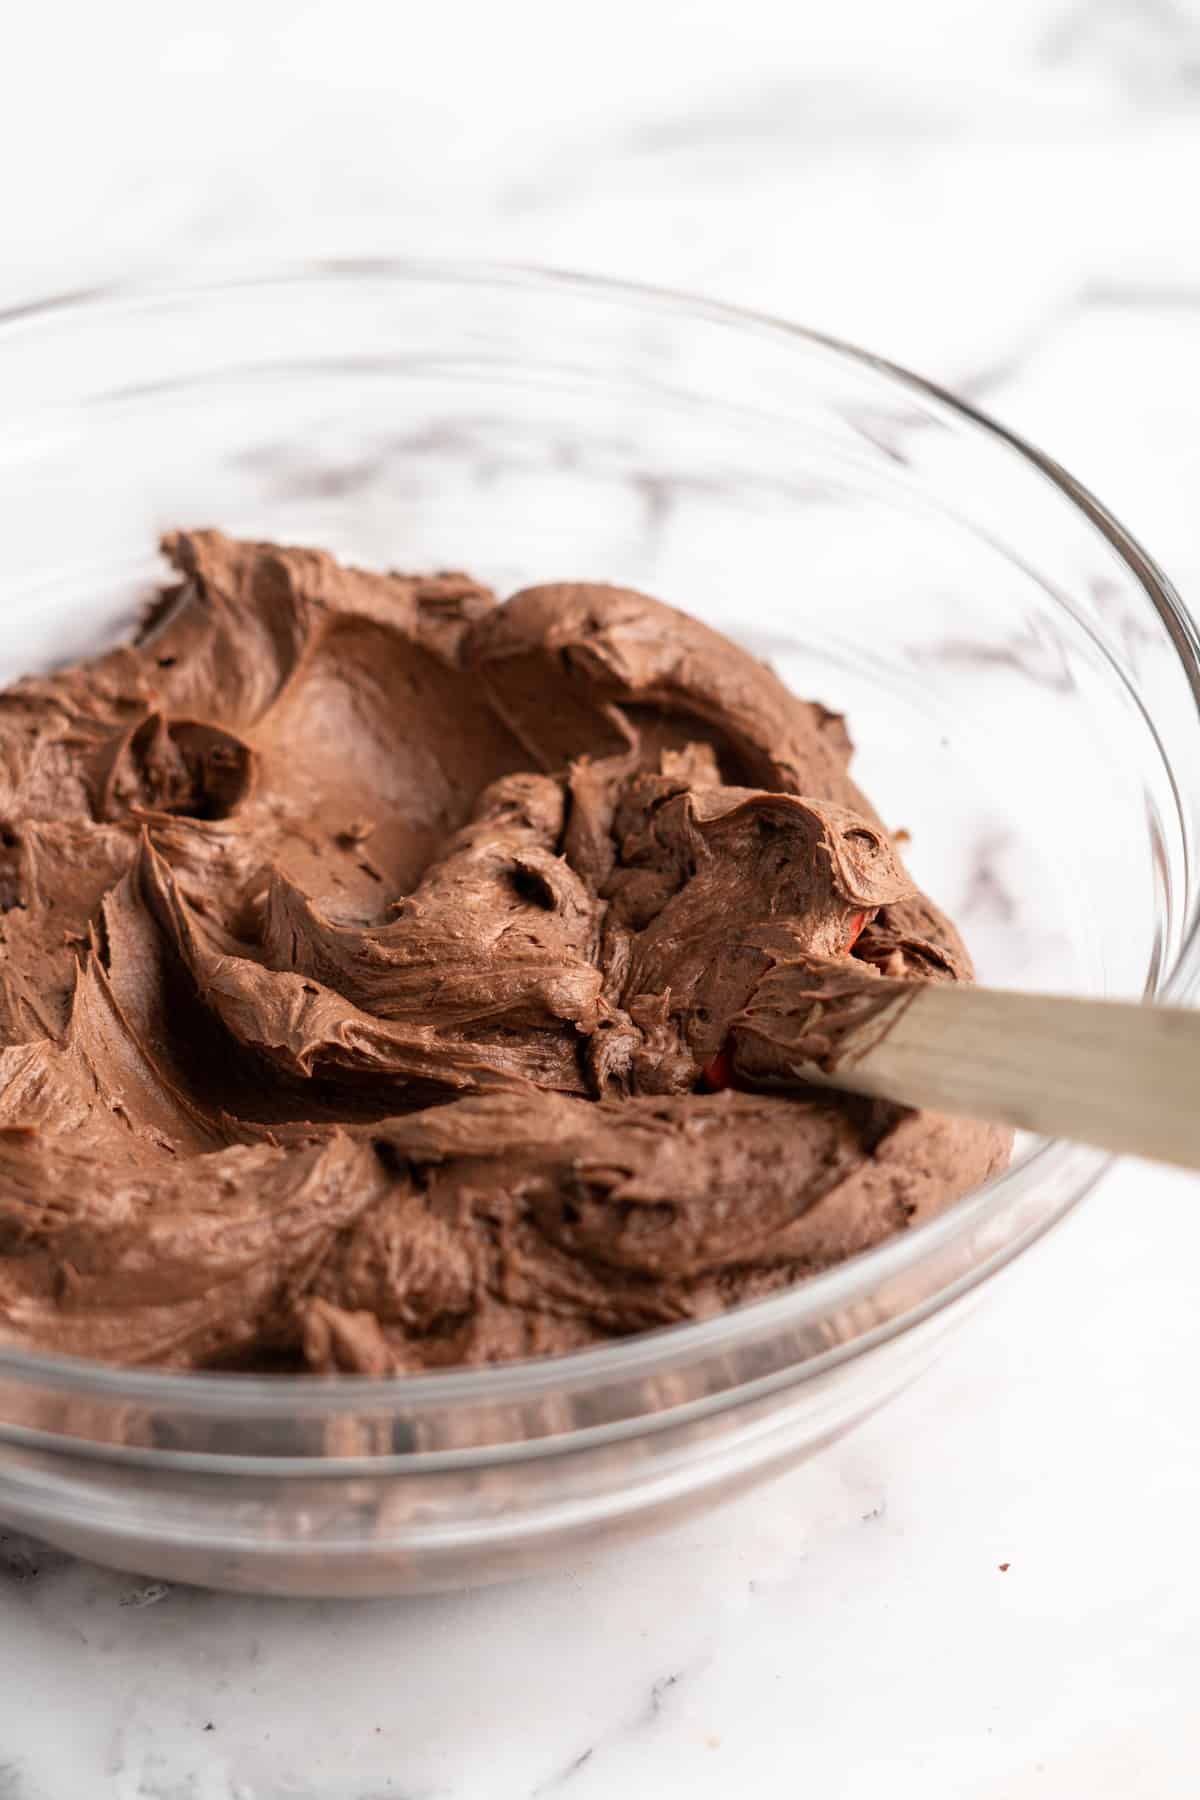 Vegan chocolate frosting in glass mixing bowl